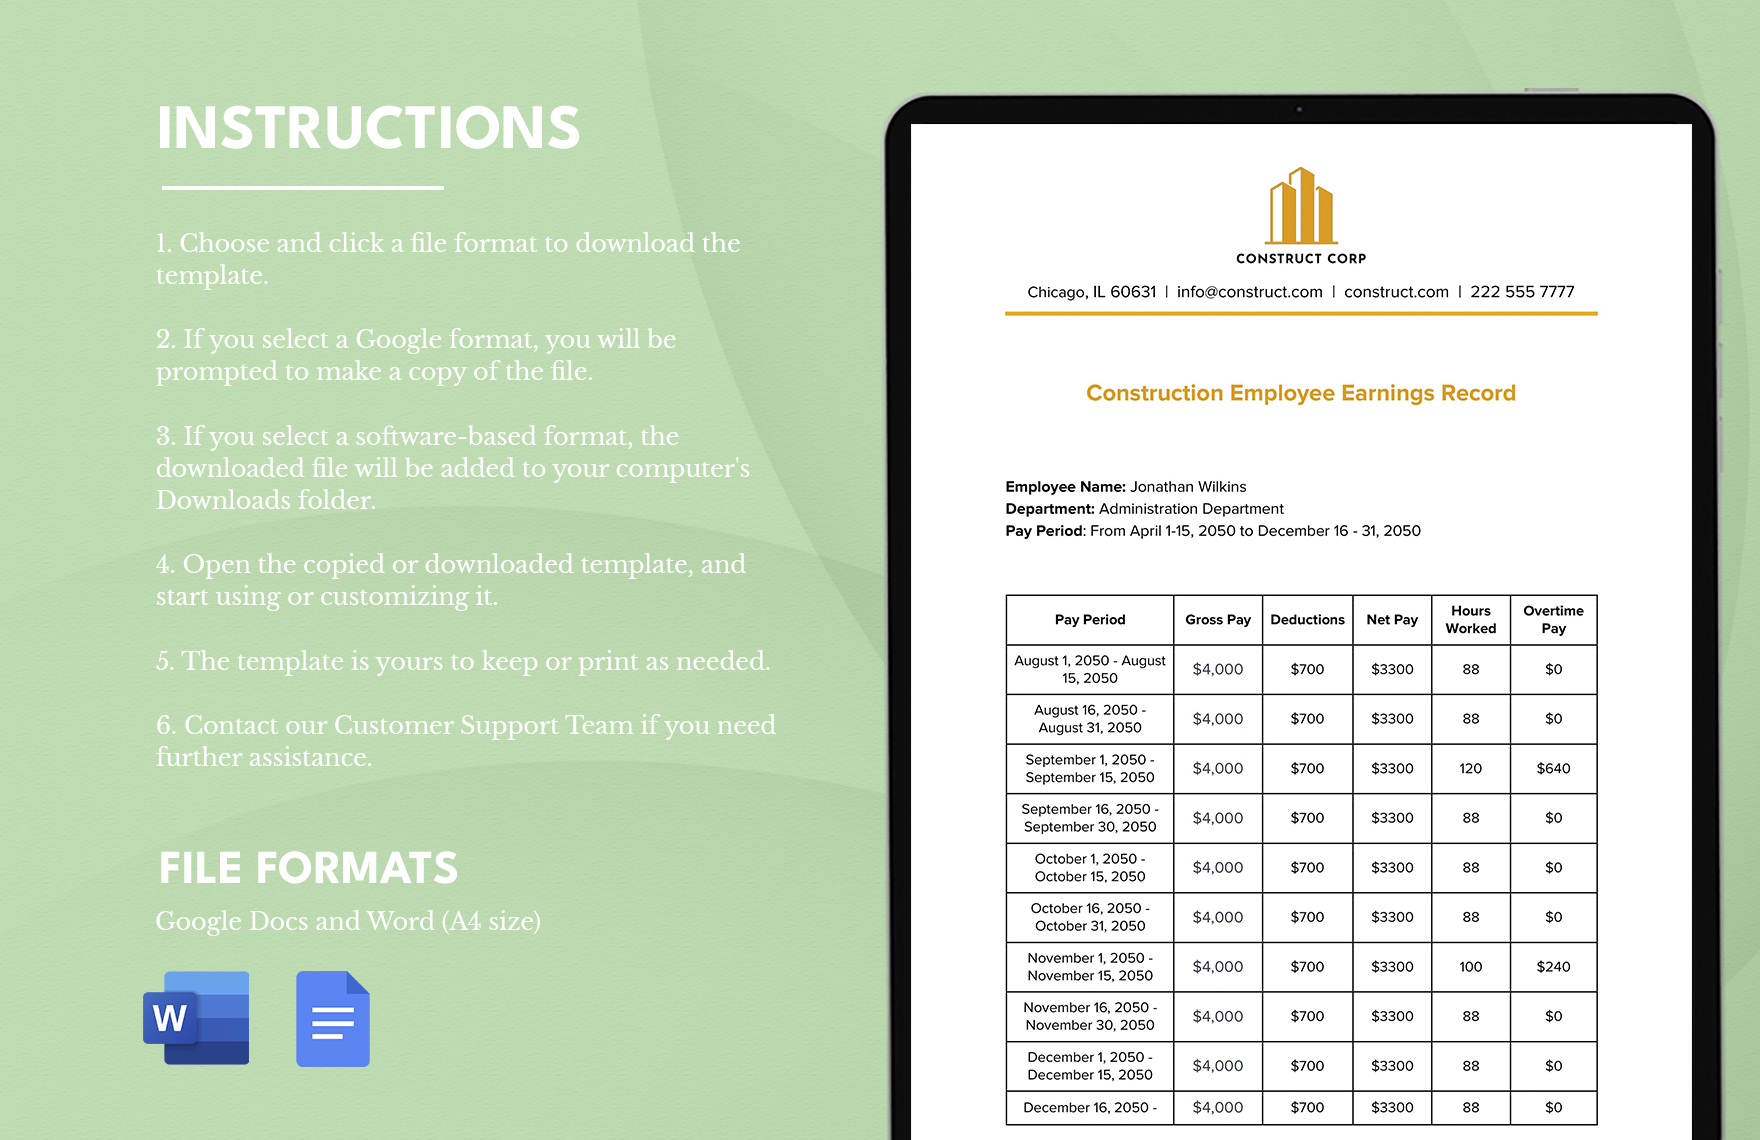 Construction Employee Earnings Record